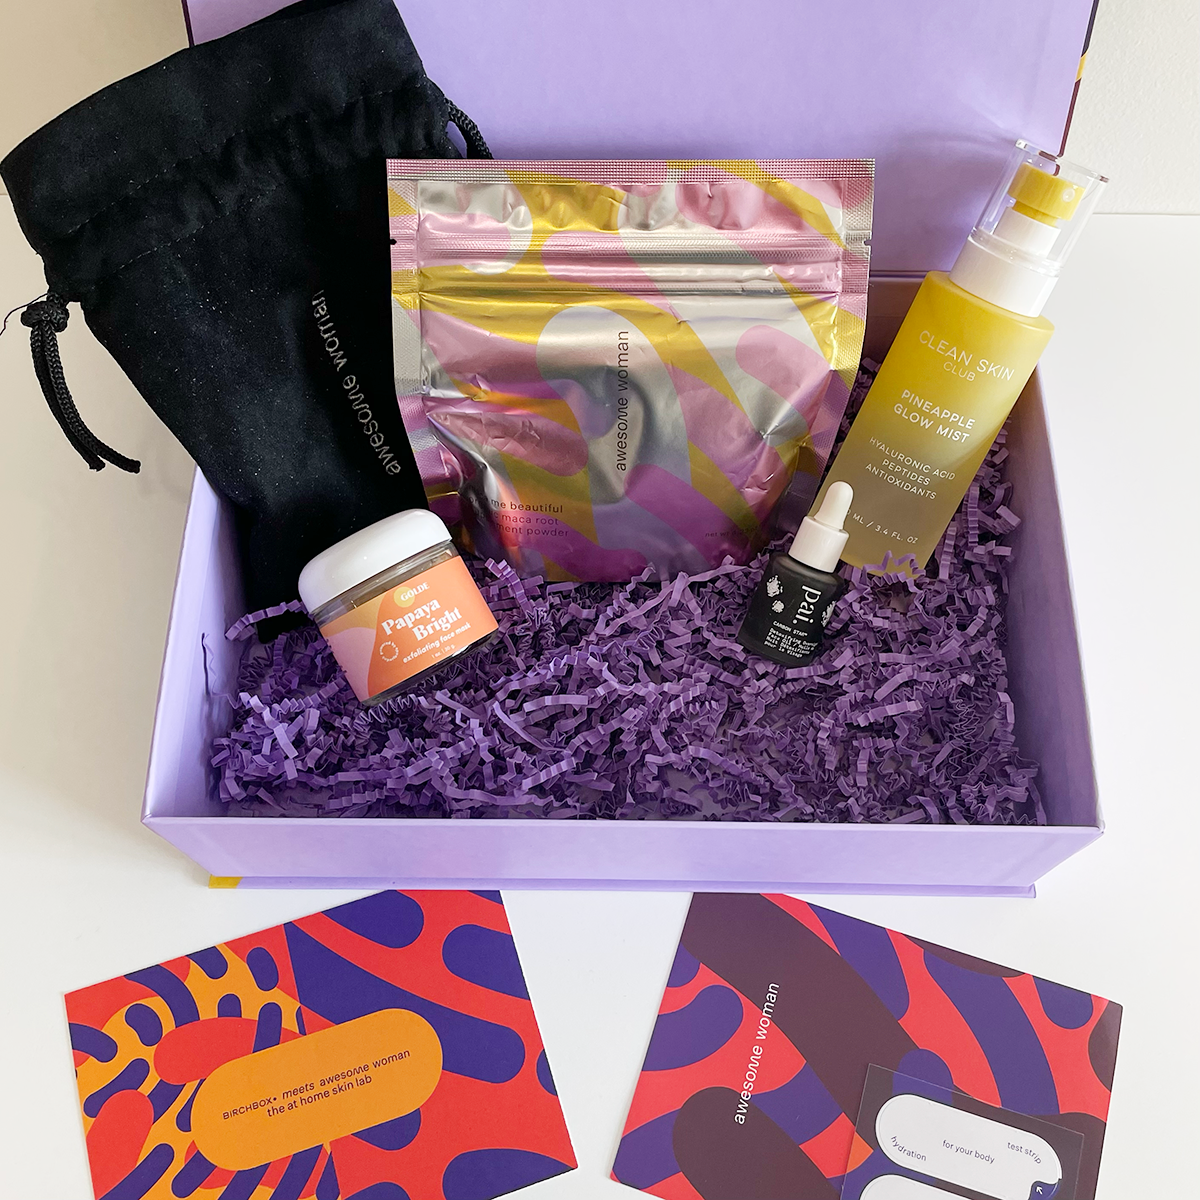 4 beauty products resting inside a lilac box with accompanying info cards